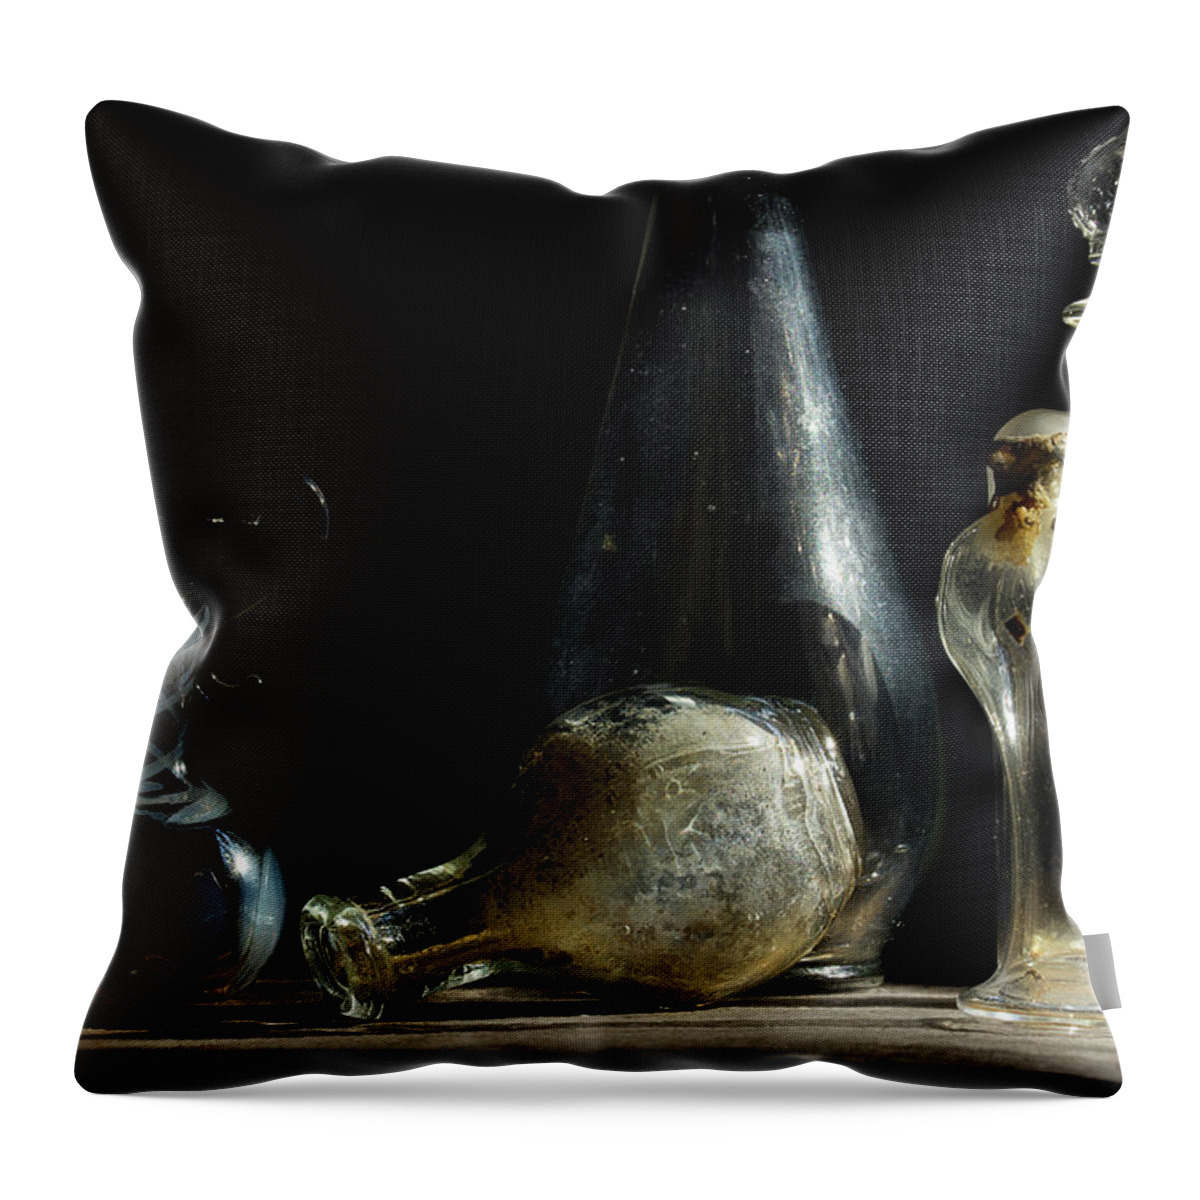 Bottle Throw Pillow featuring the photograph Vintage Bottles by Mike Eingle